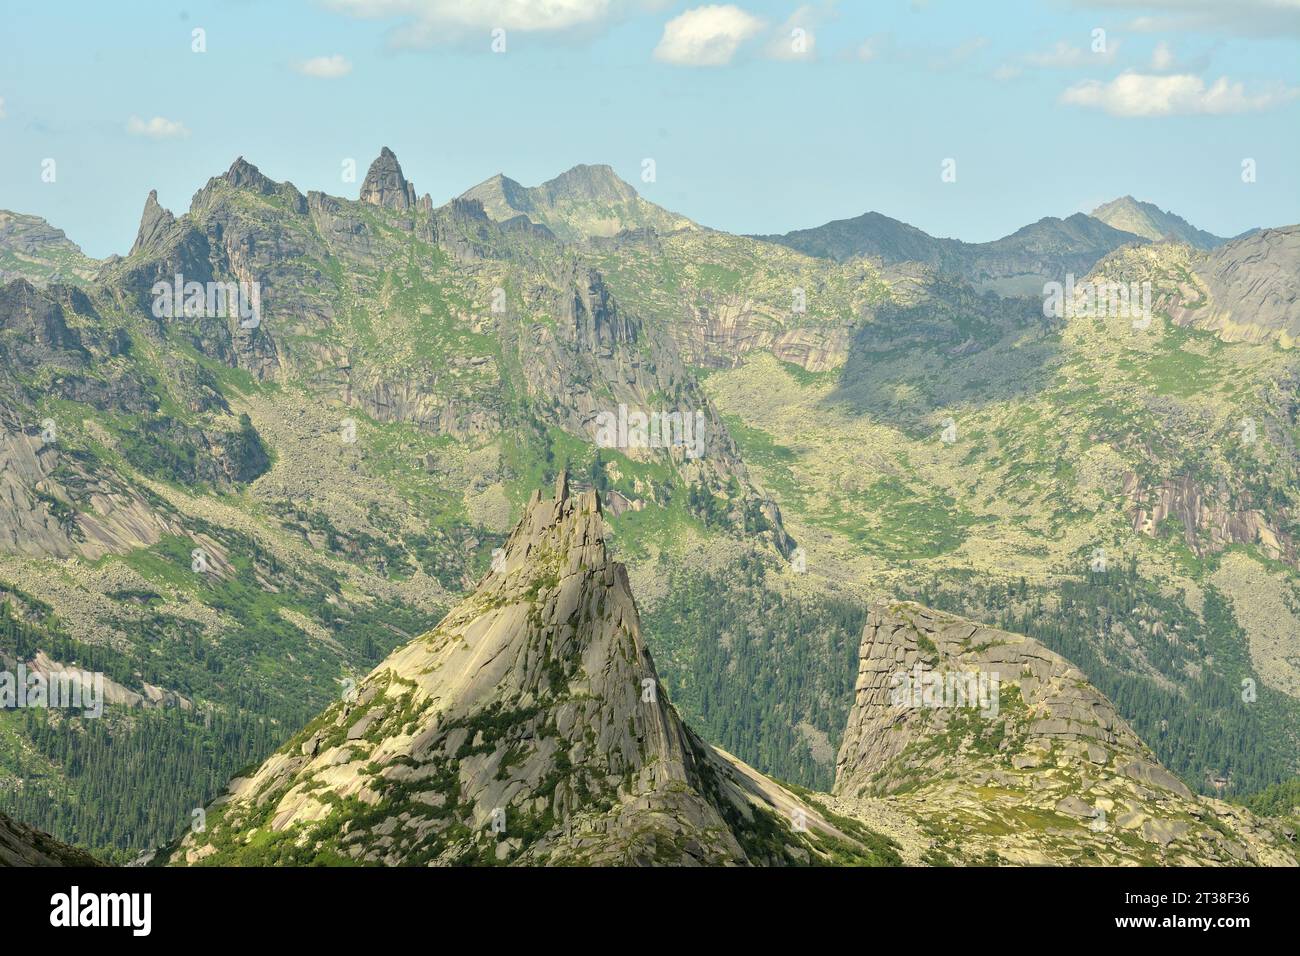 A large double-headed rock with steep slopes against the backdrop of pointed mountain peaks on a sunny summer day. Parabola Rock, Ergaki Nature Park, Stock Photo